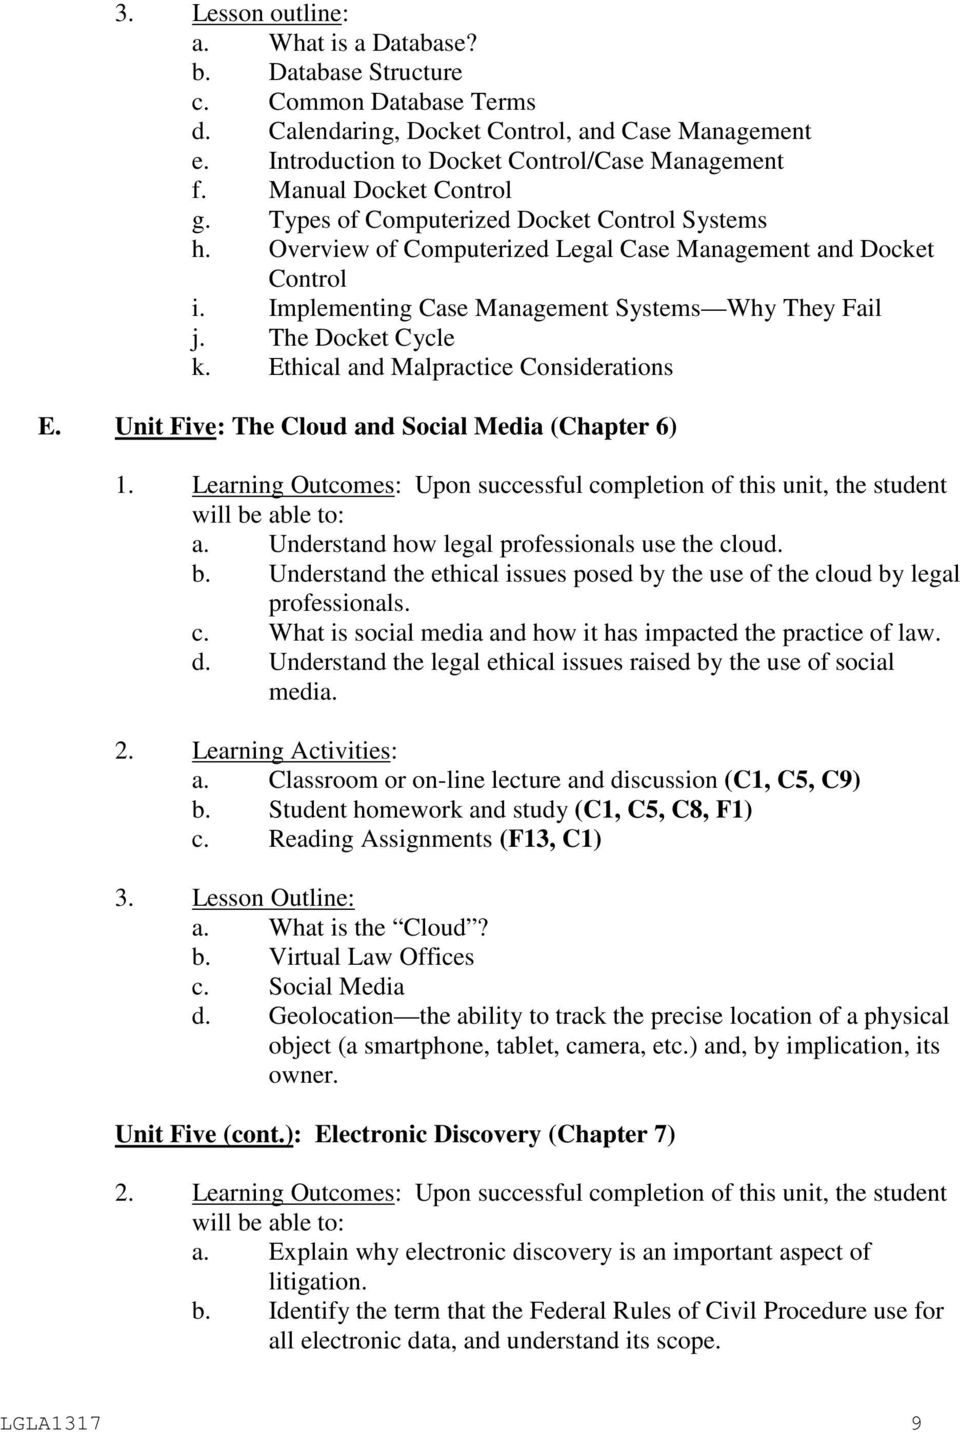 The Docket Cycle k. Ethical and Malpractice Considerations E. Unit Five: The Cloud and Social Media (Chapter 6) a. Understand how legal professionals use the cloud. b.